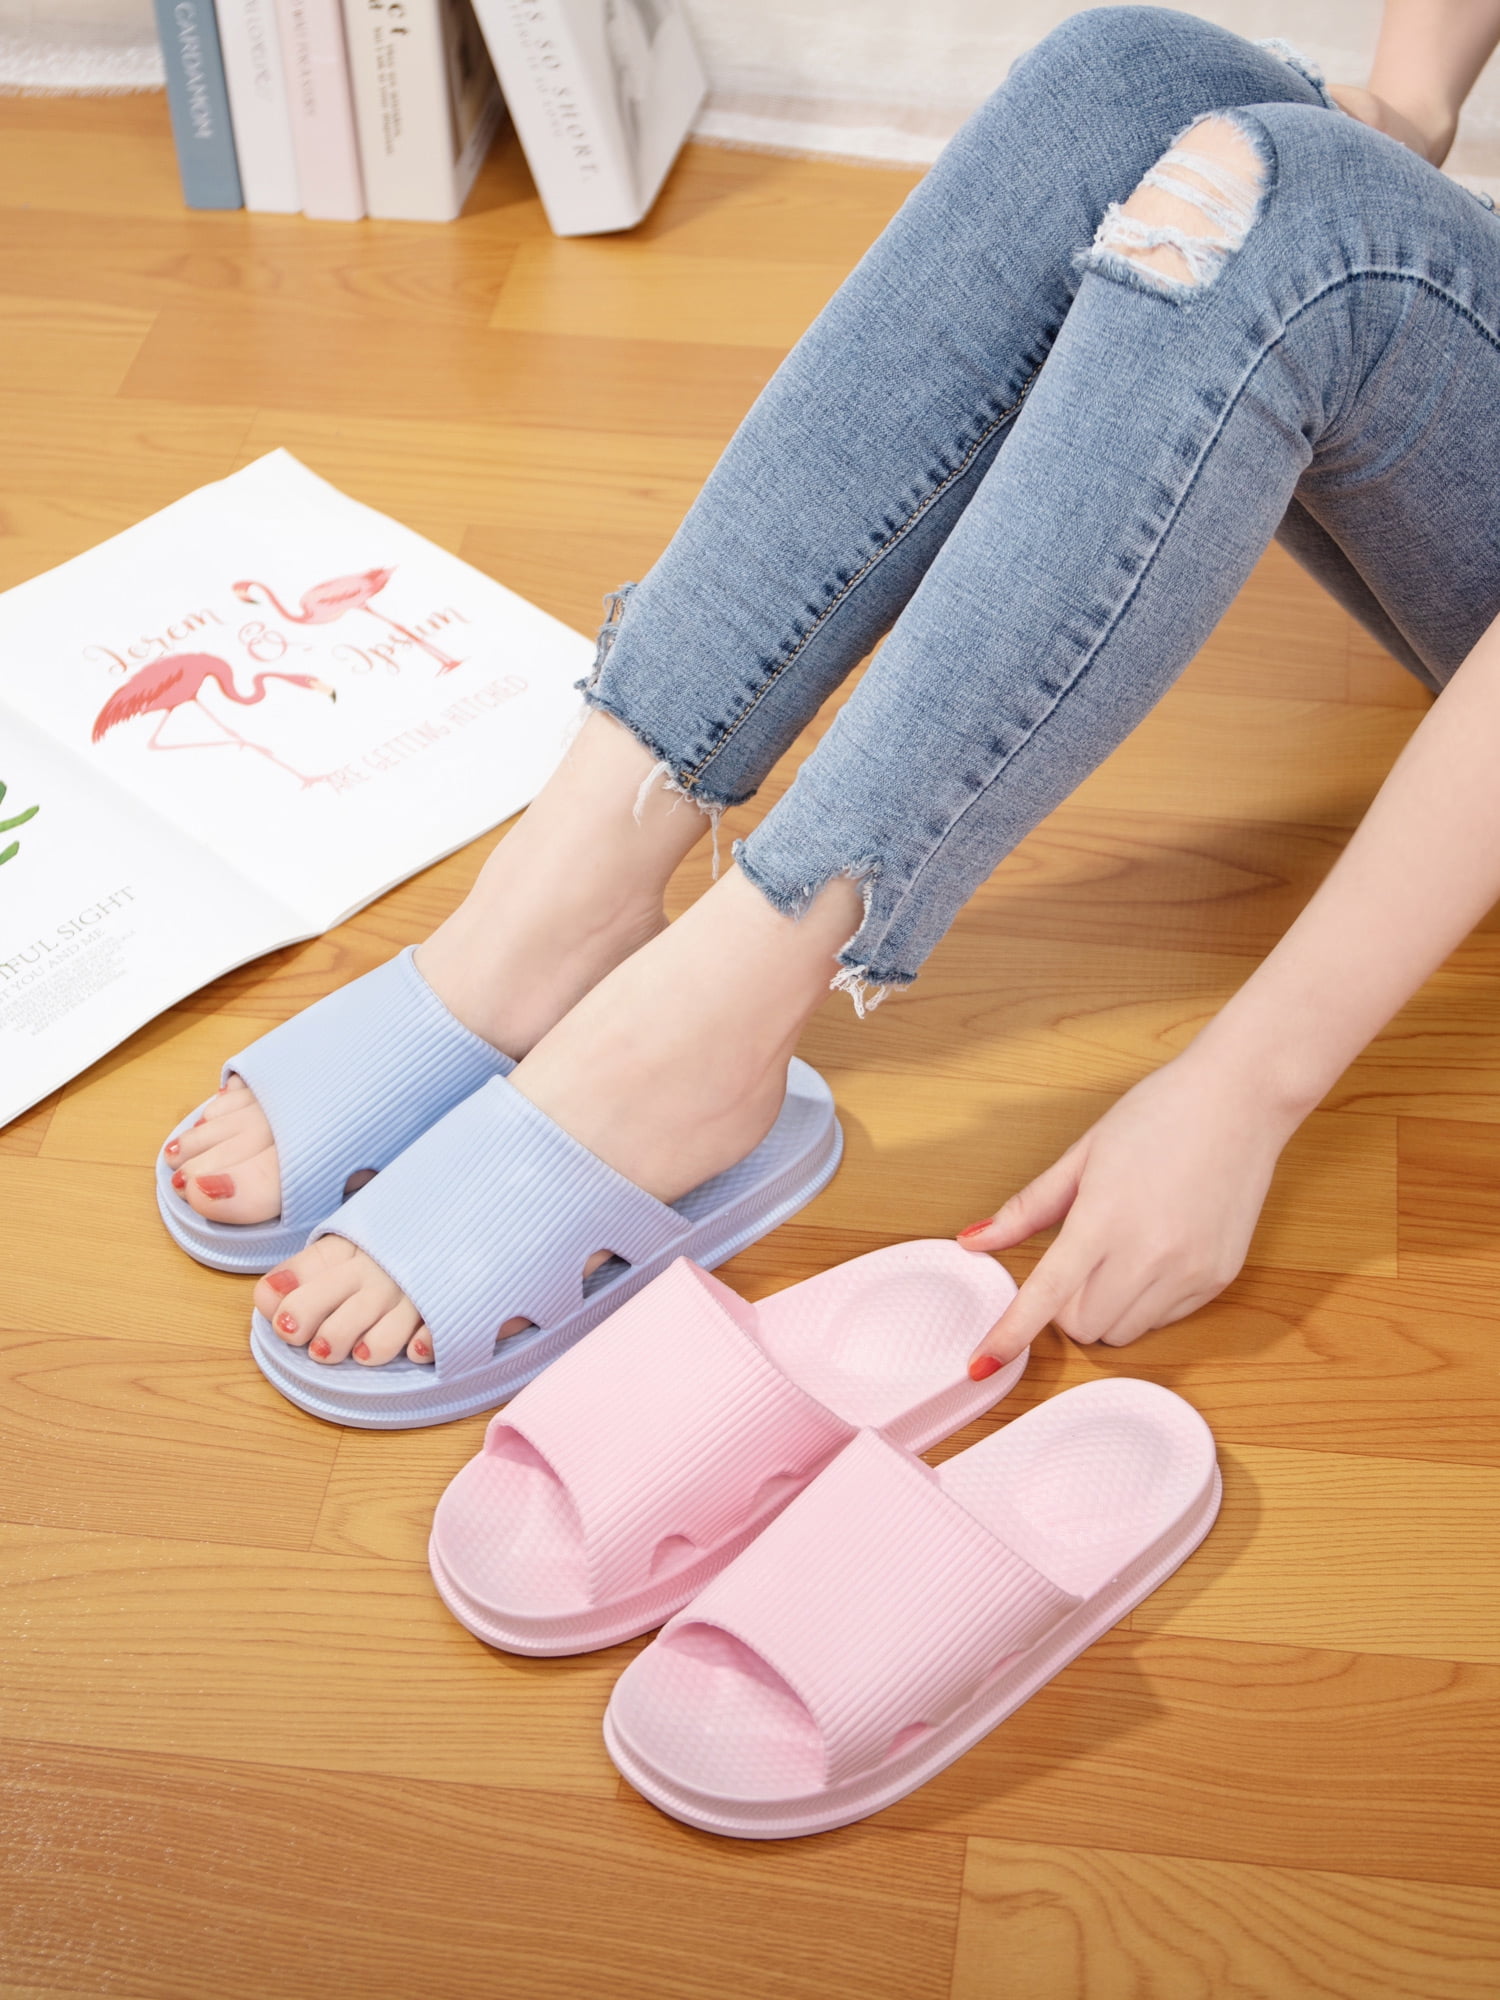 Crazy Lady Woman’s Man’s House Indoor & Outdoor Slippers Anti-Slip Massage Shower Spa Bath Pool Gym Slides Flip Flop Open Toe Comfortable Soft Sandals Casual Shoes Light Weight EVA Platform